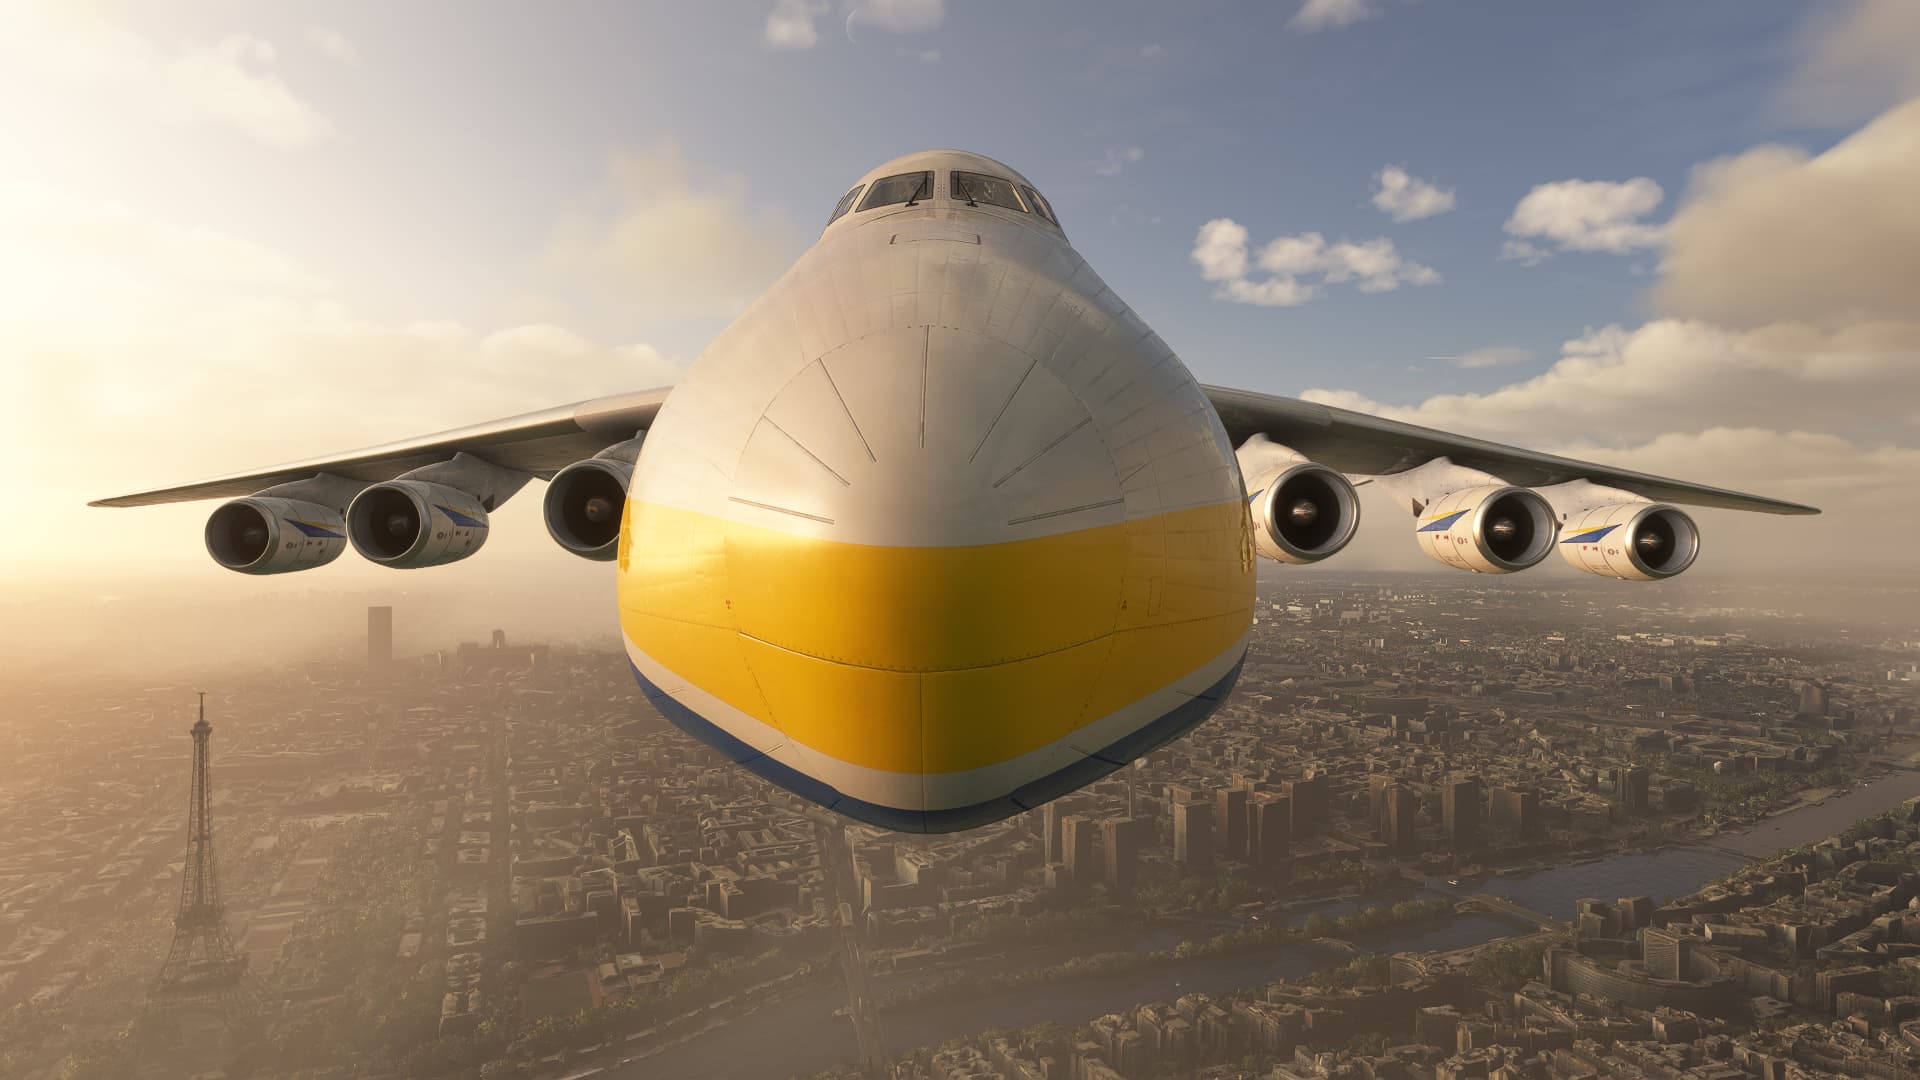 A head on view of the Antonov An-225 flying over Paris. The Eiffel Tower is visible in the bottom left of the image.